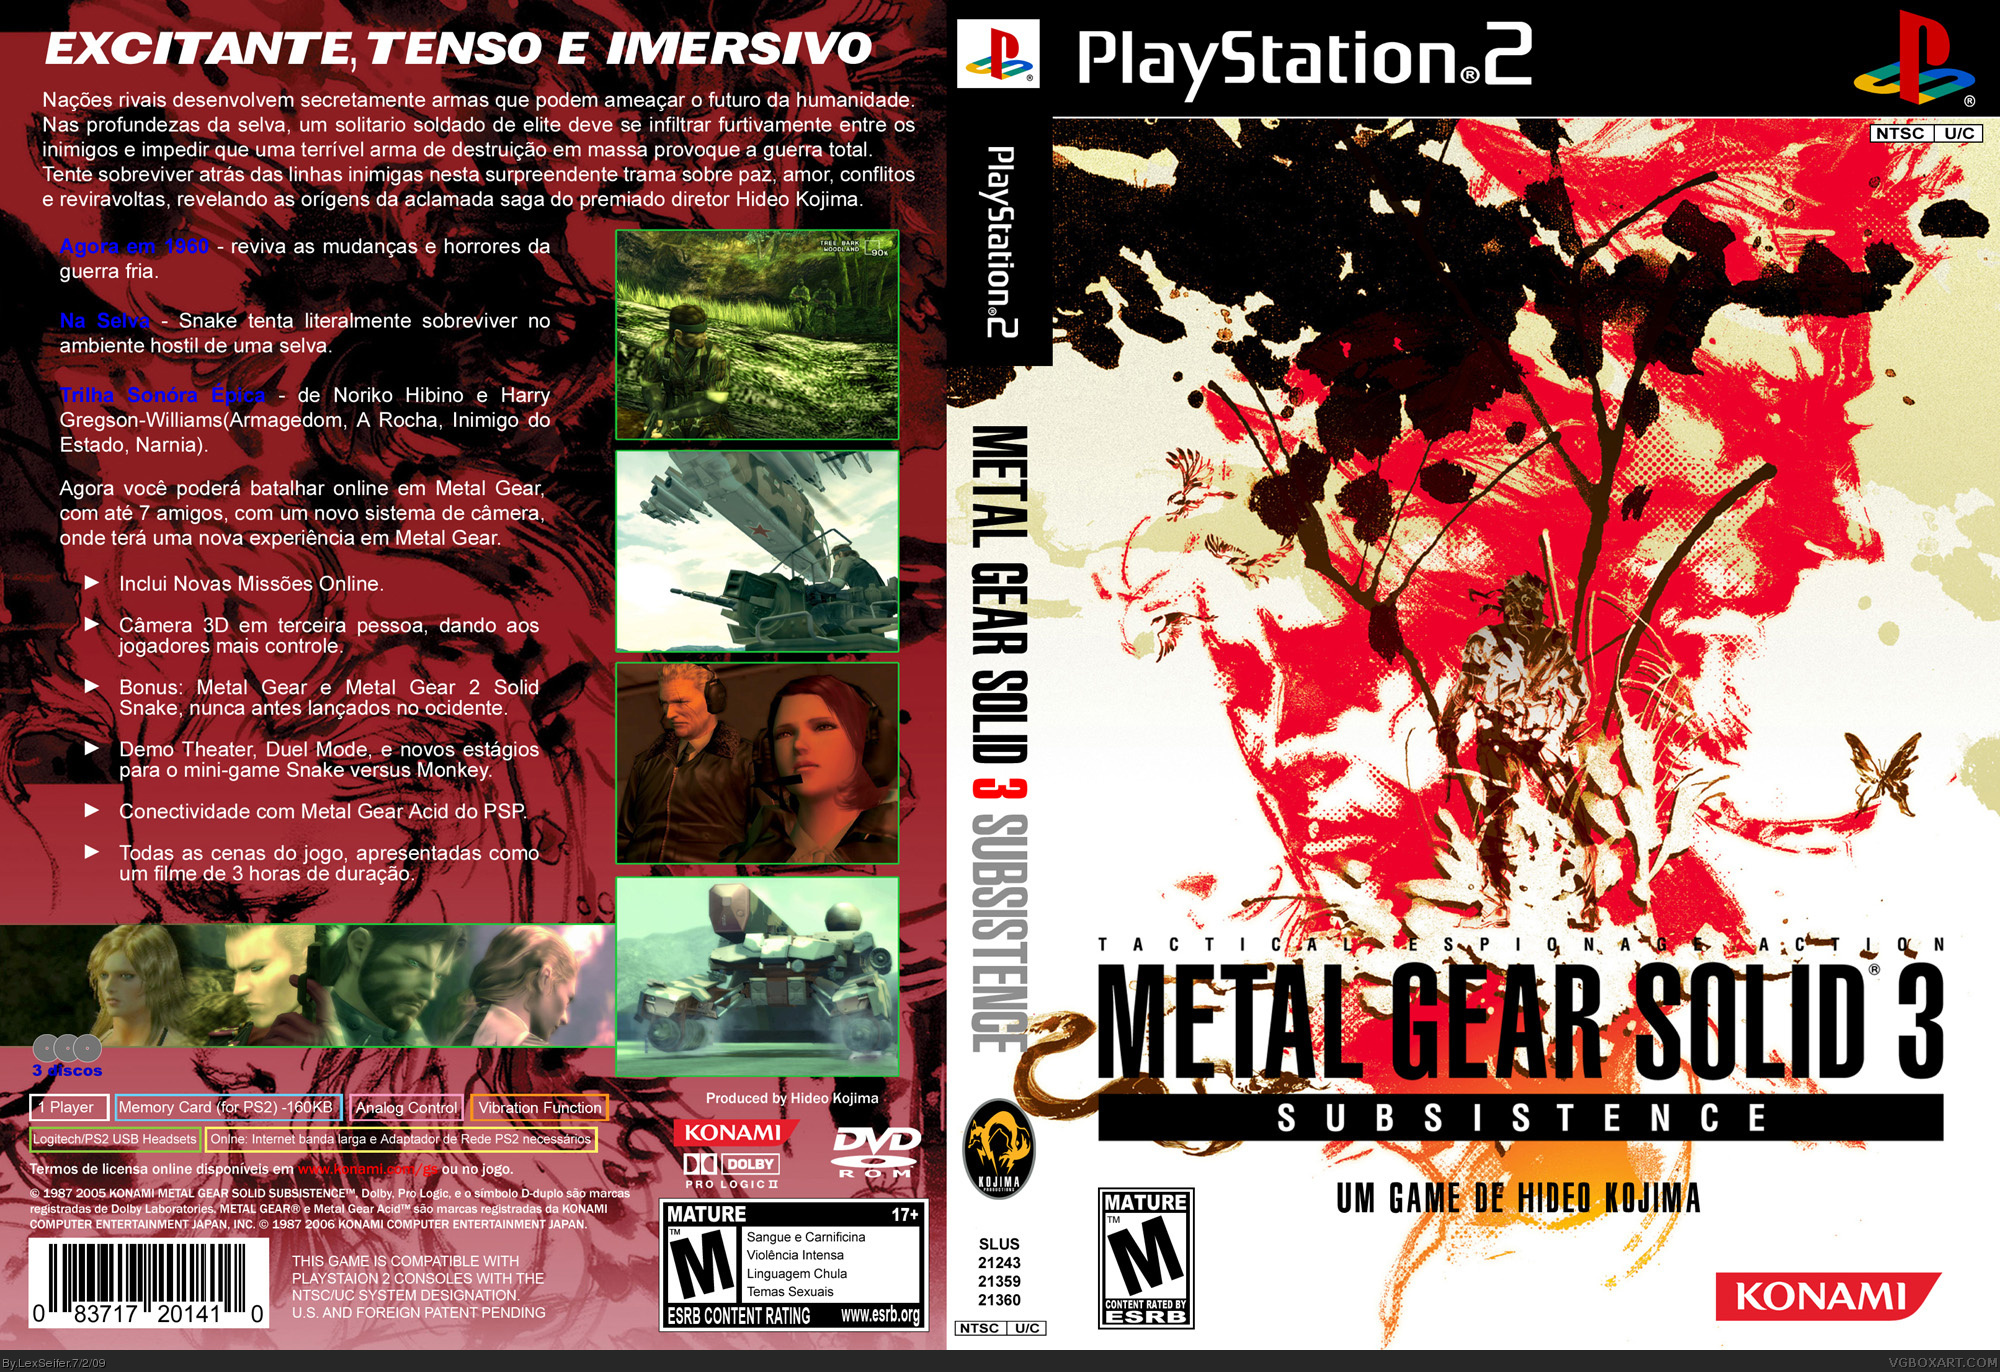 Metal gear solid 3 subsistence cover